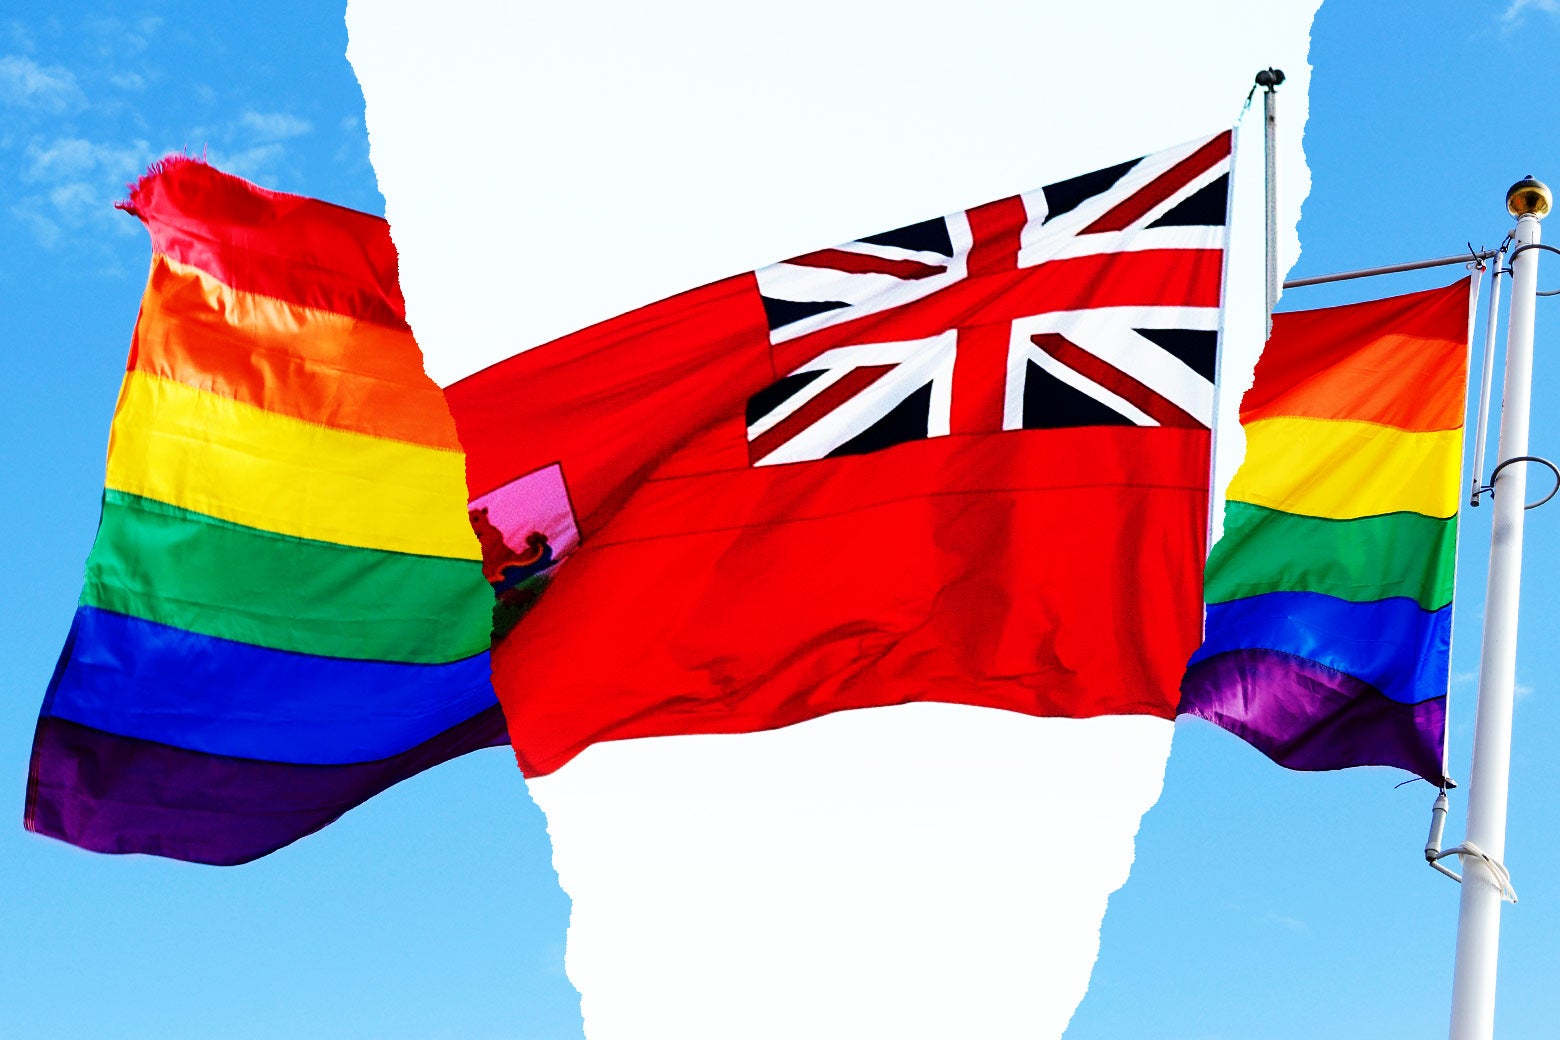 Photo illustration: an LGBTQ pride flag is broken up by the Bermuda territory flag. Photo illustration by Thinkstock and Drew Angerer/Getty Images.